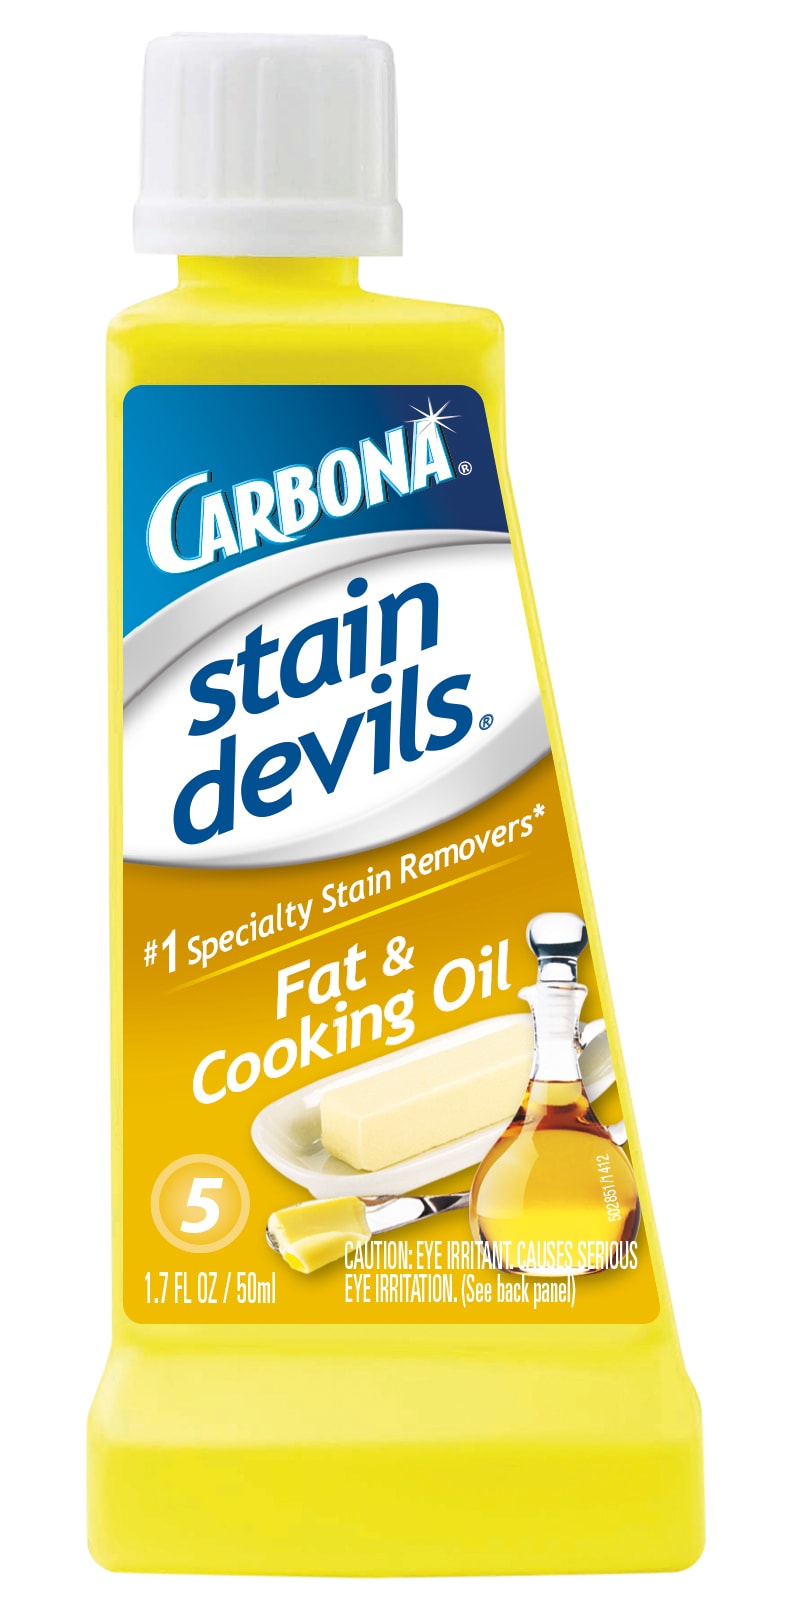 Carbona Stain Devil, Carbona Upholstery Cleaners, Carbona Stain Remover, Carbona  Spot Lifter, Carbona Cleaning